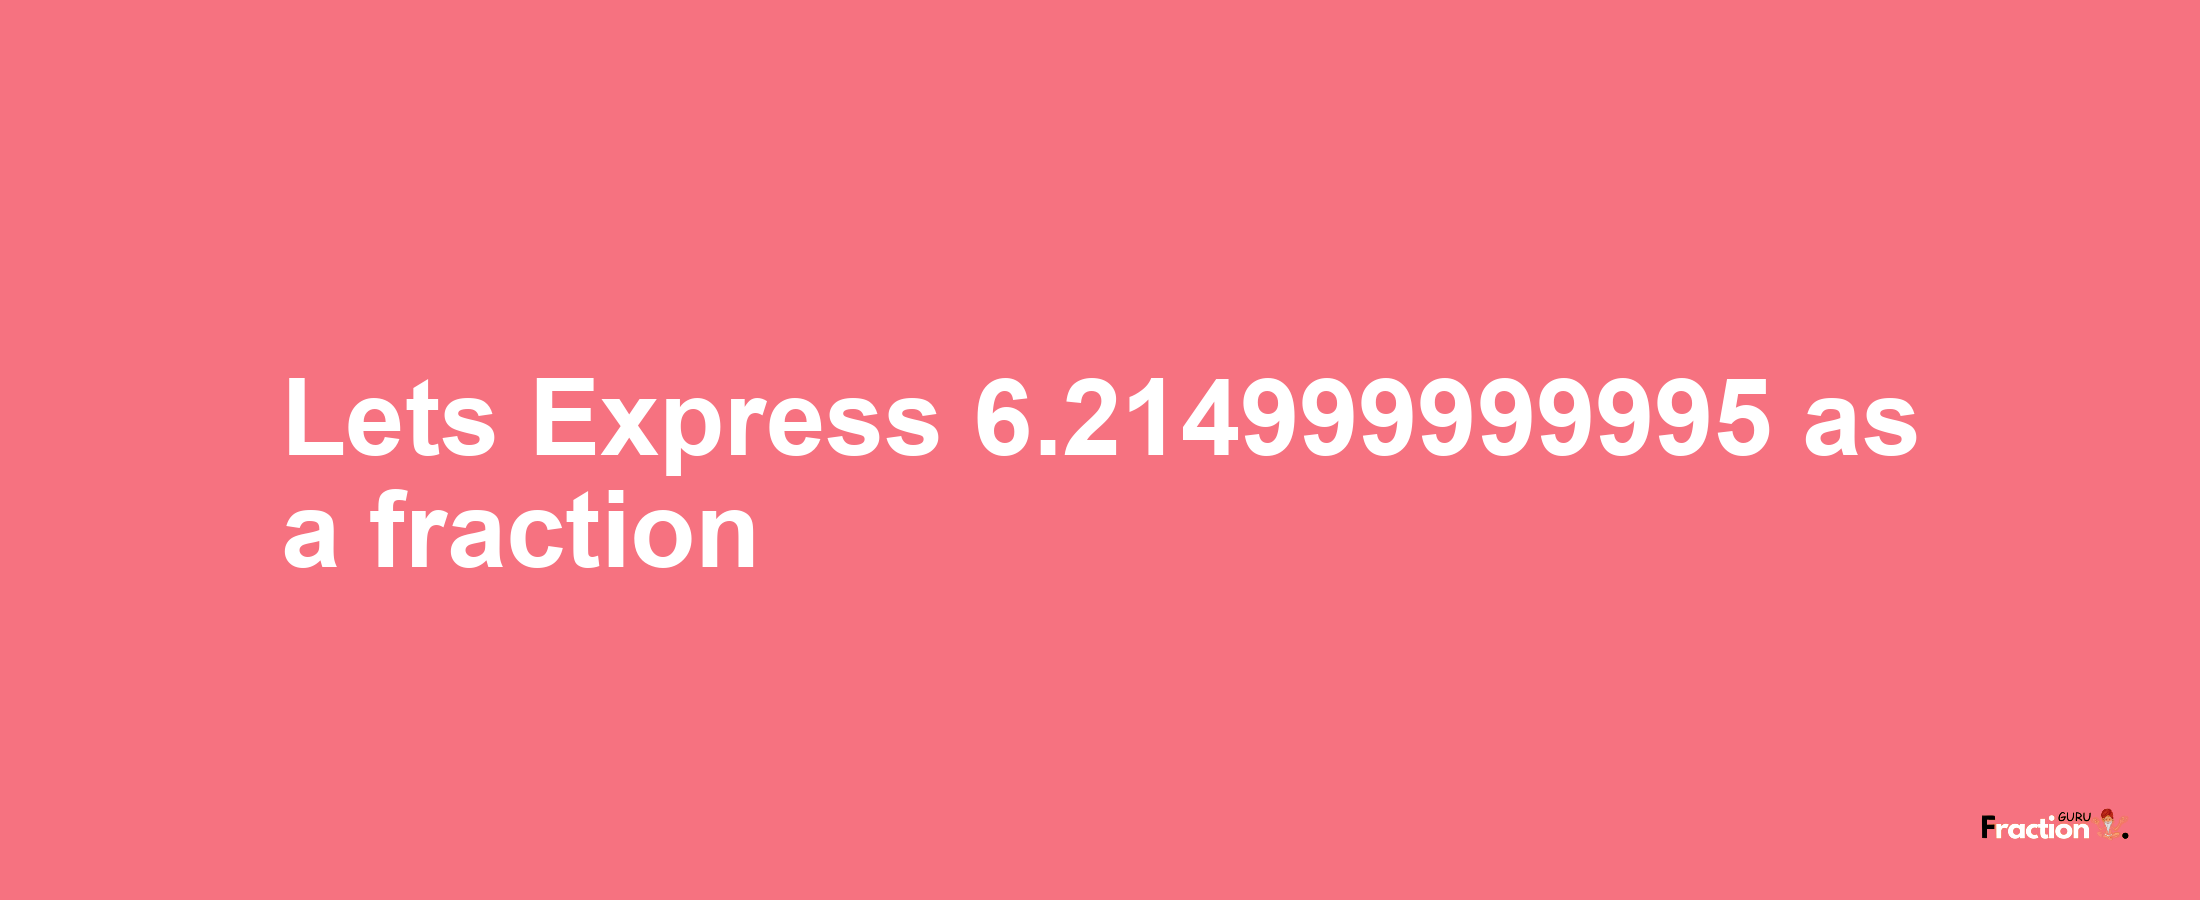 Lets Express 6.214999999995 as afraction